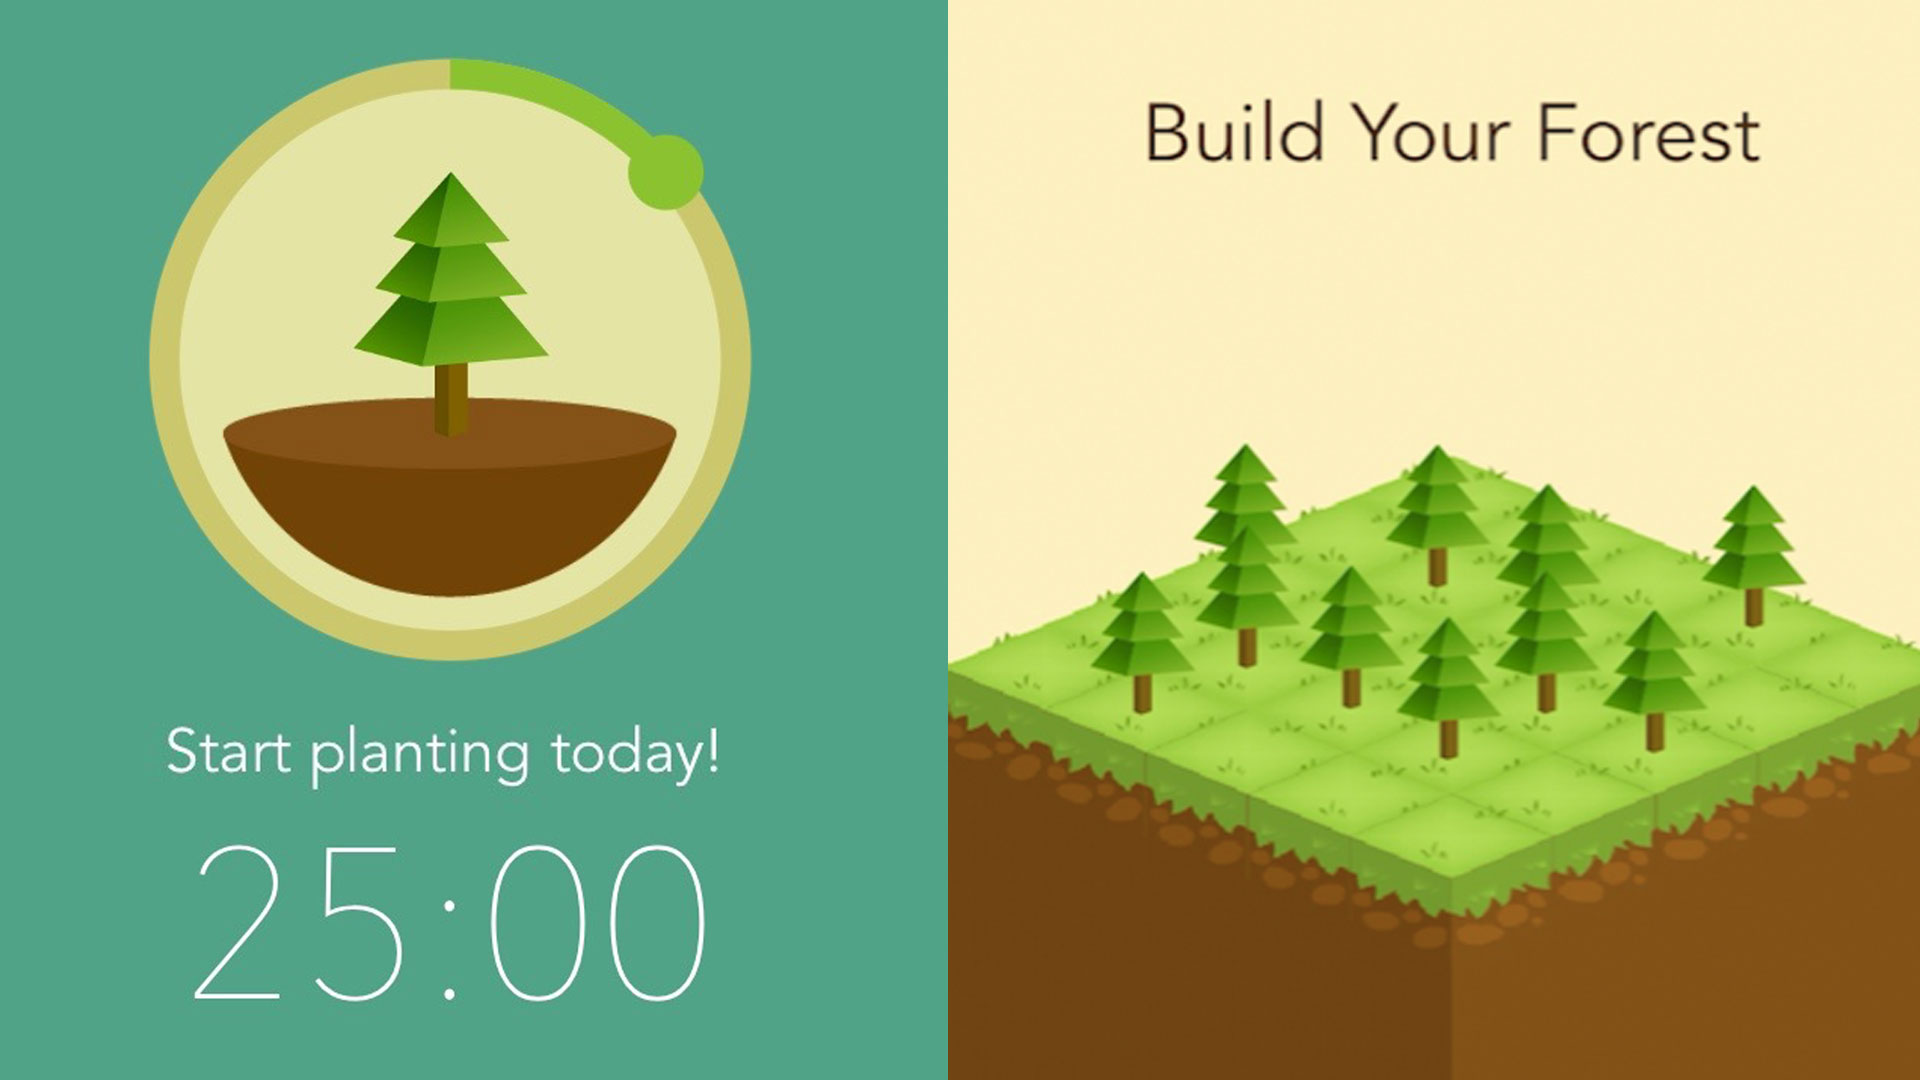 This App Helps People Stay Focused at Work - Forest